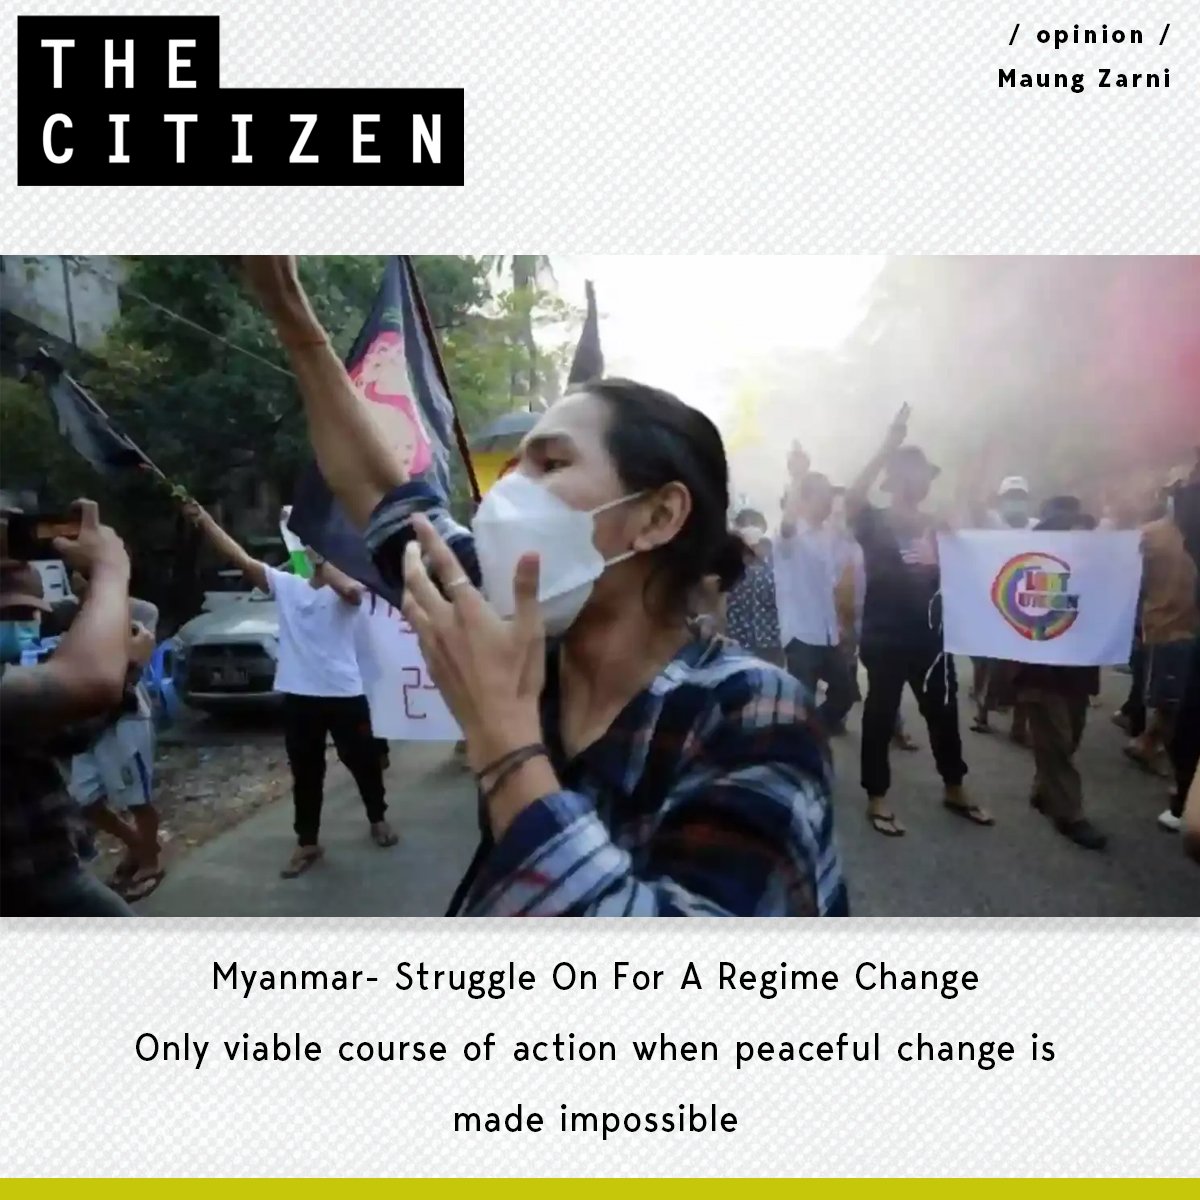 Thousands of young people have taken up arms. There are no good options for the country.

@drzarni writes, Read the full report here: bit.ly/3L2MaJA 

@WatchingMyanmar @MyanmarWitness @UNinMyanmar @mohadmNUG @abfsu_cec @TweetsBurma @NDBurma @StudentsFFBurma